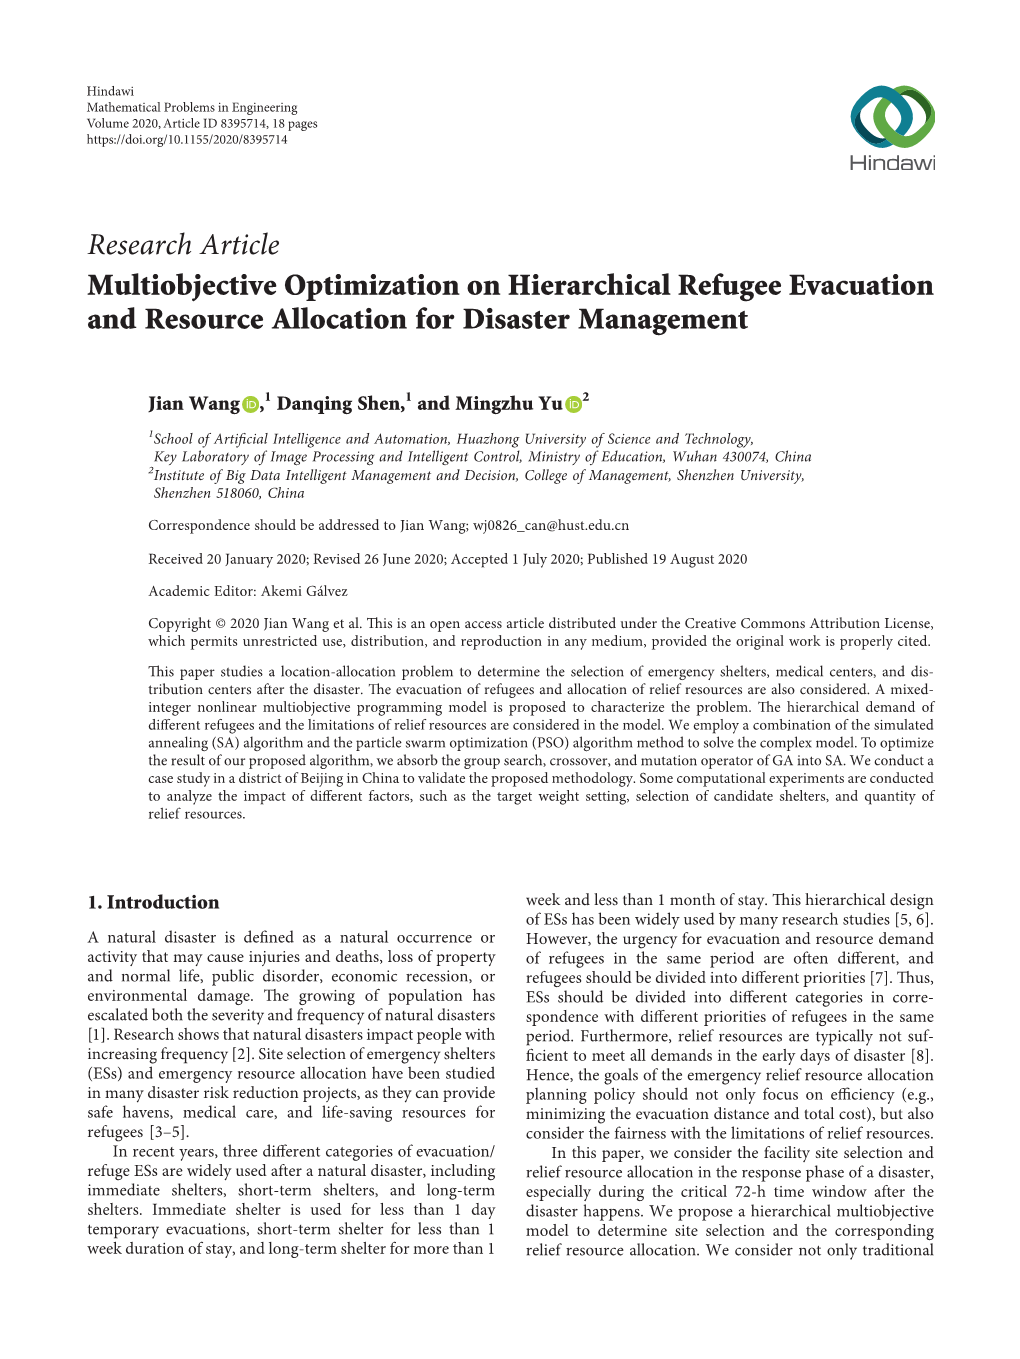 Multiobjective Optimization on Hierarchical Refugee Evacuation and Resource Allocation for Disaster Management